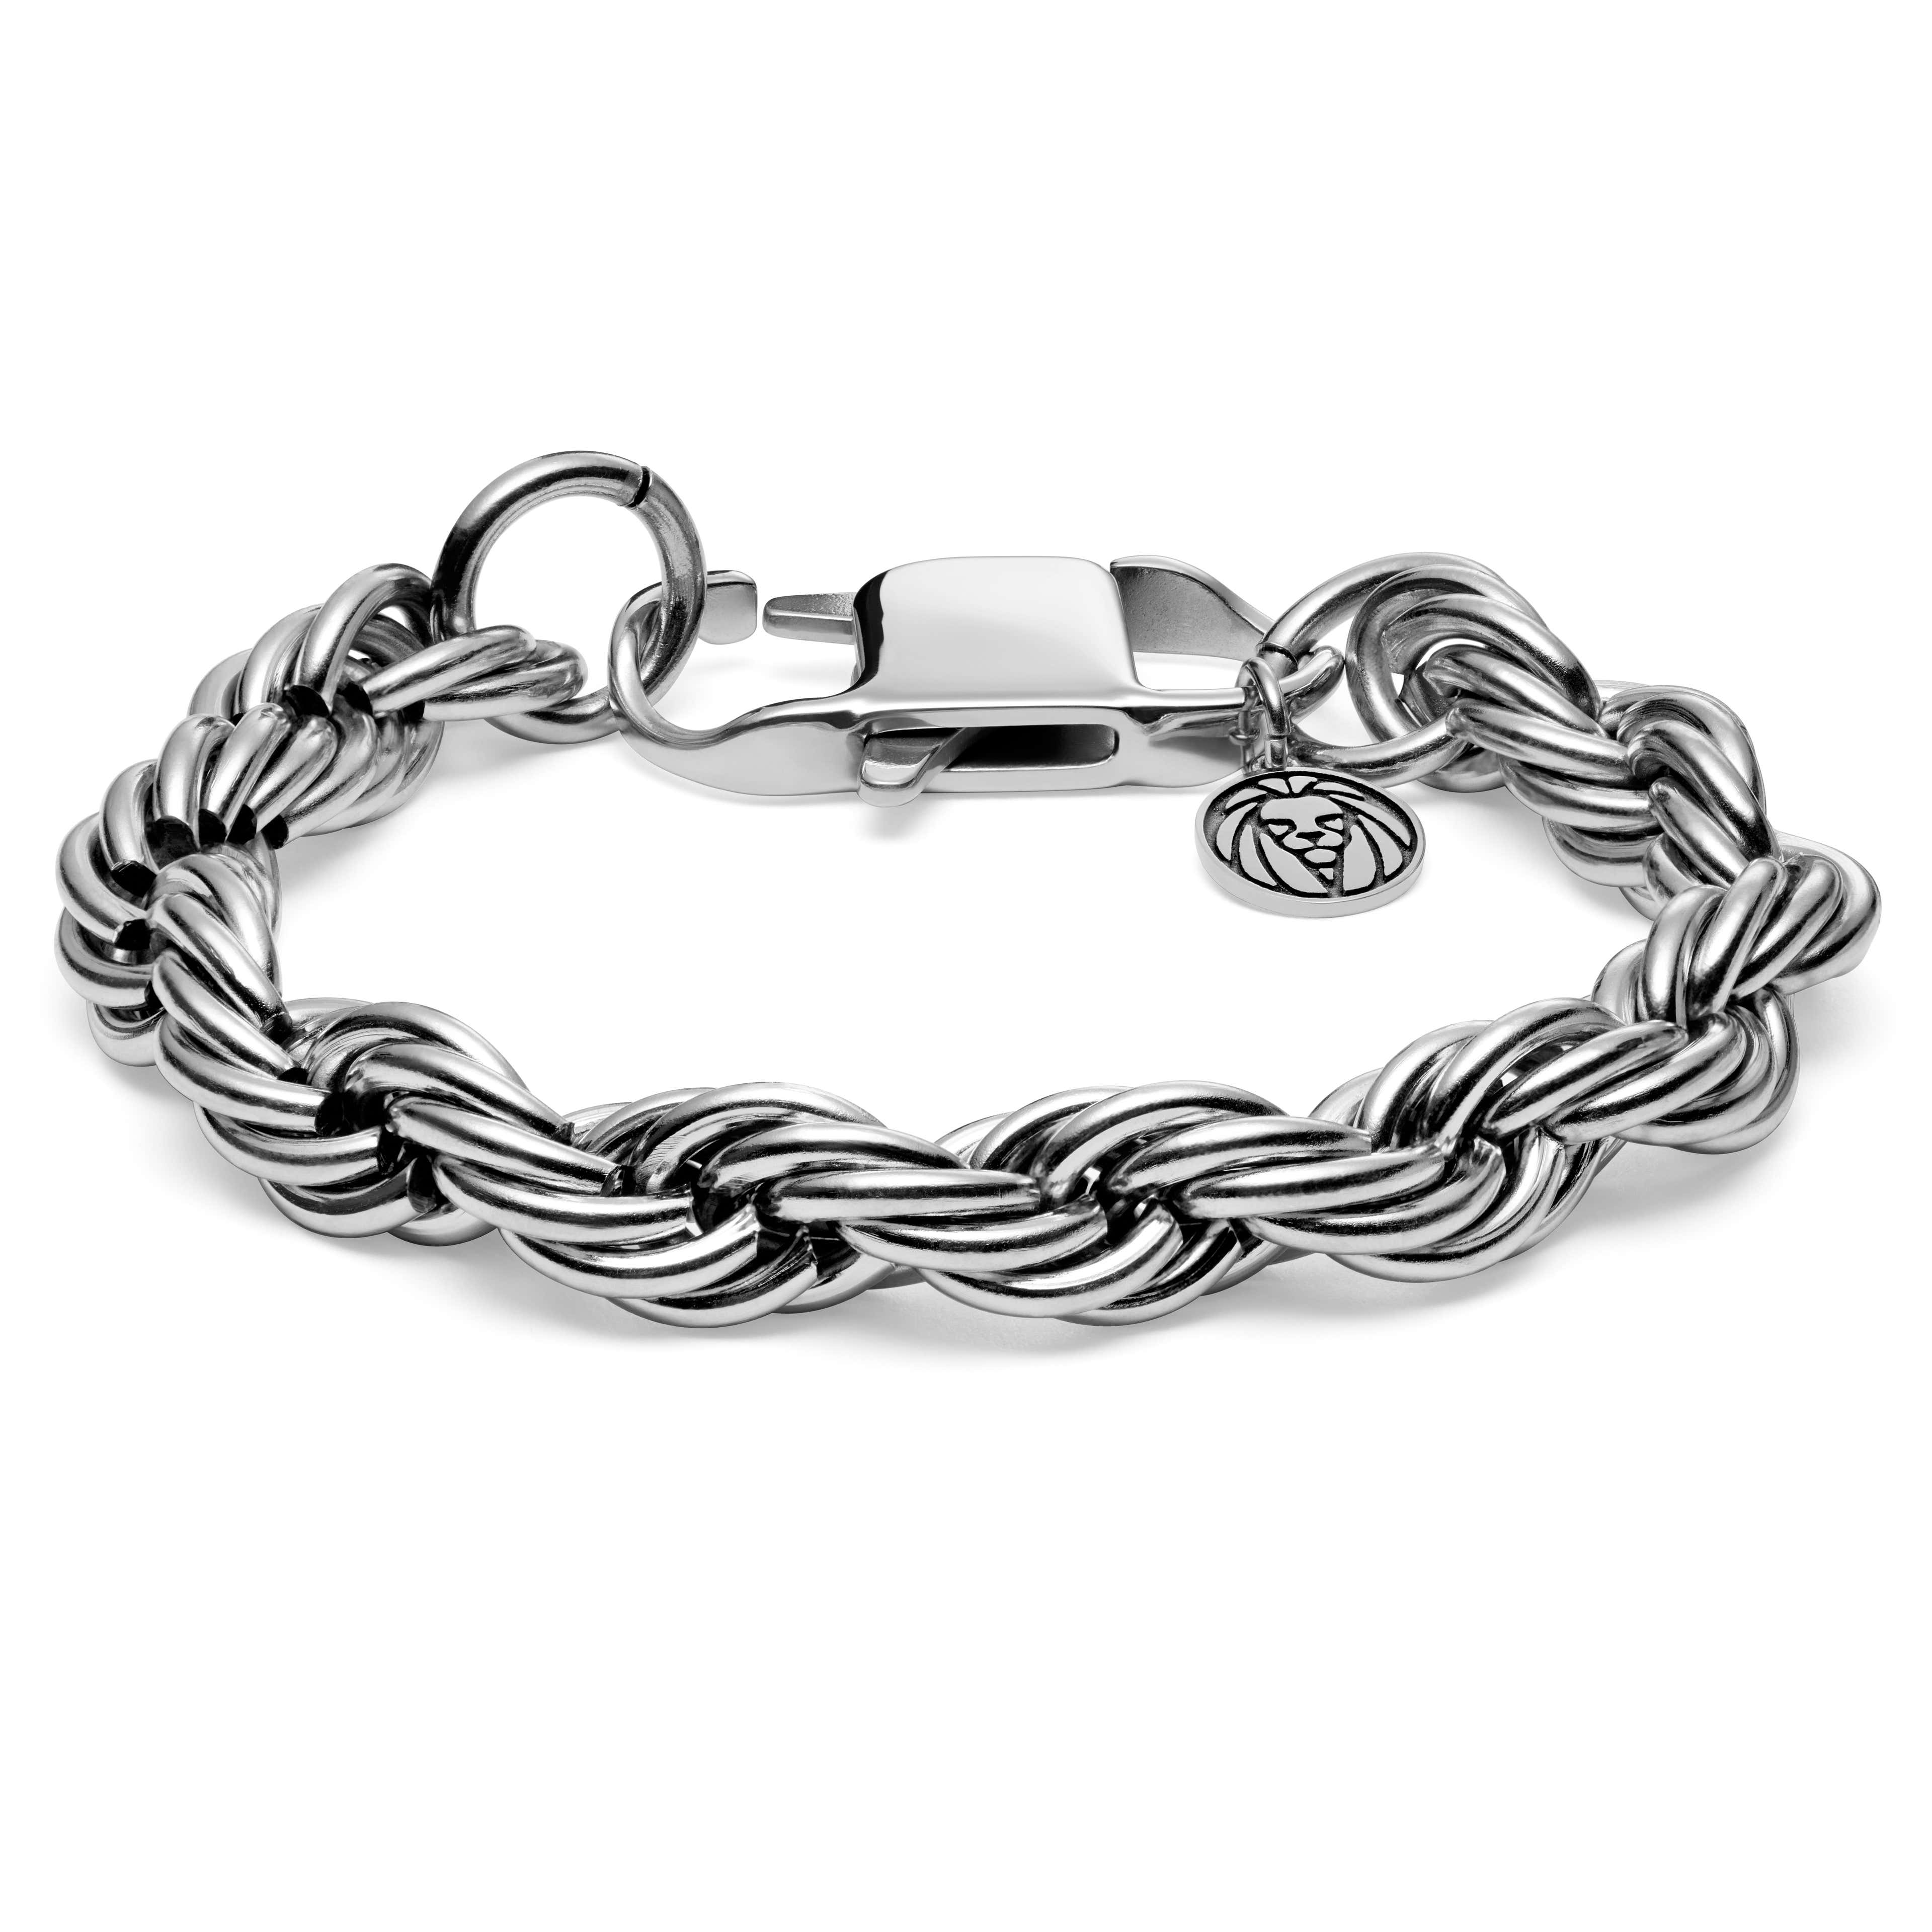 Corwin Amager Silver-Tone 10mm Rope Chain Bracelet